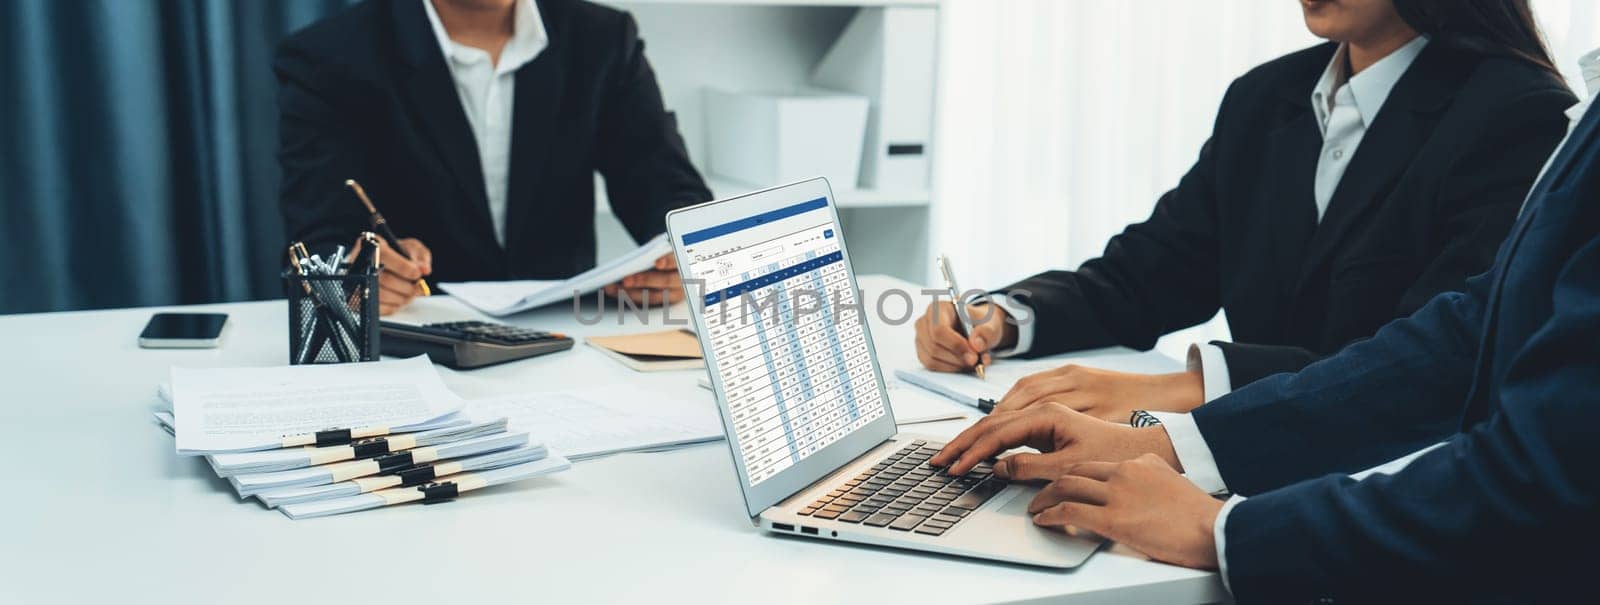 Corporate accountant team use accounting software on laptop to calculate and maximize tax refund and improve financial performance base on financial data. Modern business accounting . Shrewd